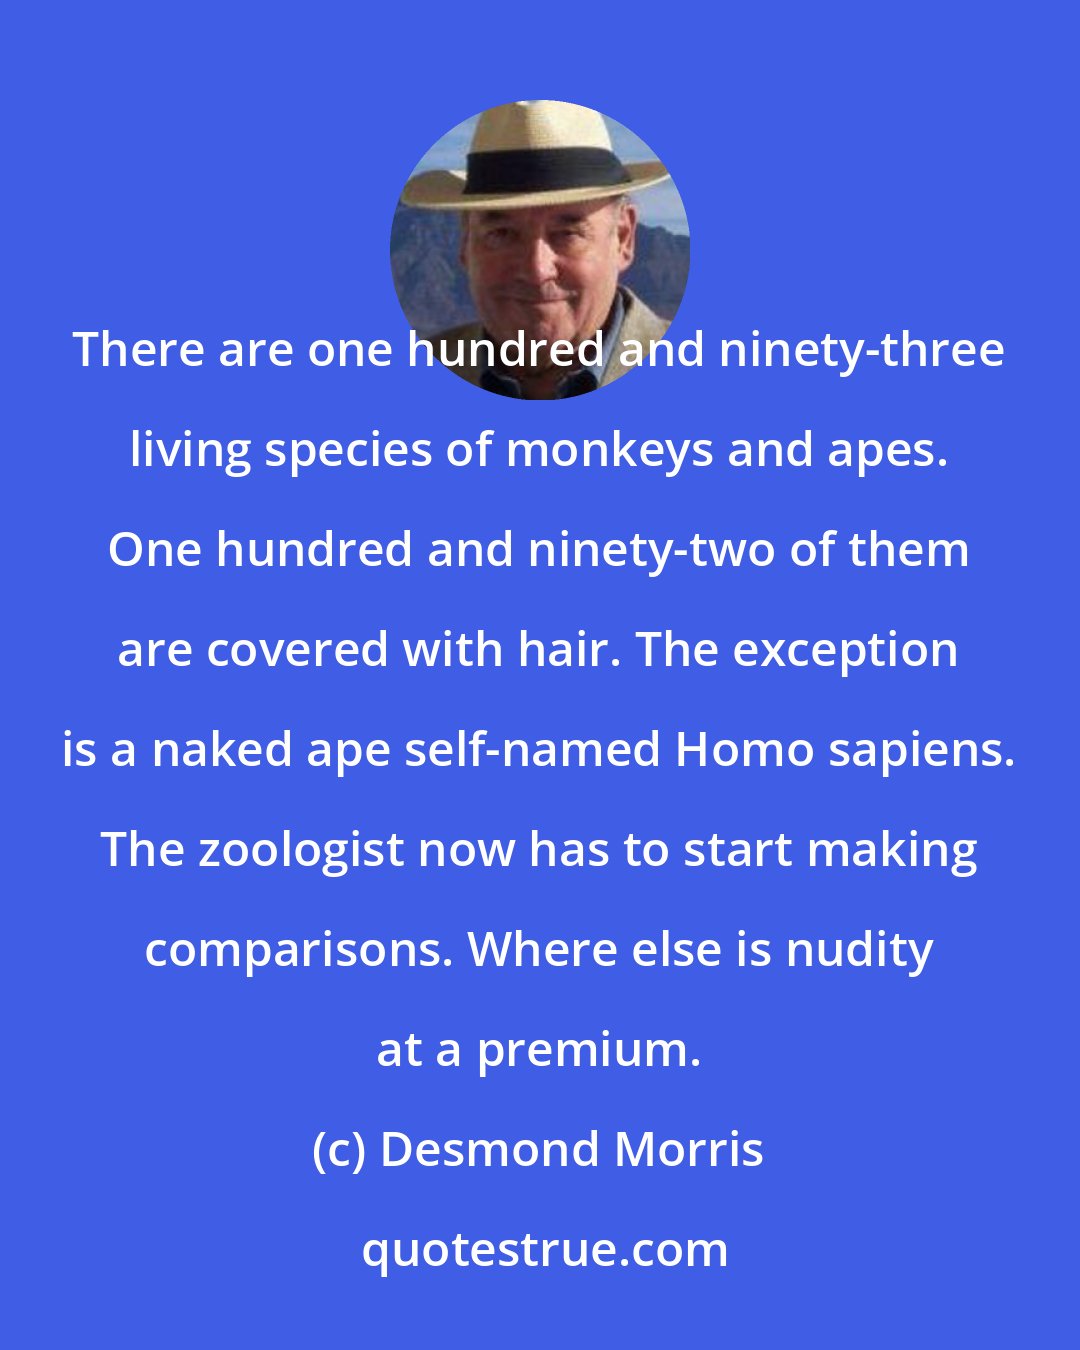 Desmond Morris: There are one hundred and ninety-three living species of monkeys and apes. One hundred and ninety-two of them are covered with hair. The exception is a naked ape self-named Homo sapiens. The zoologist now has to start making comparisons. Where else is nudity at a premium.